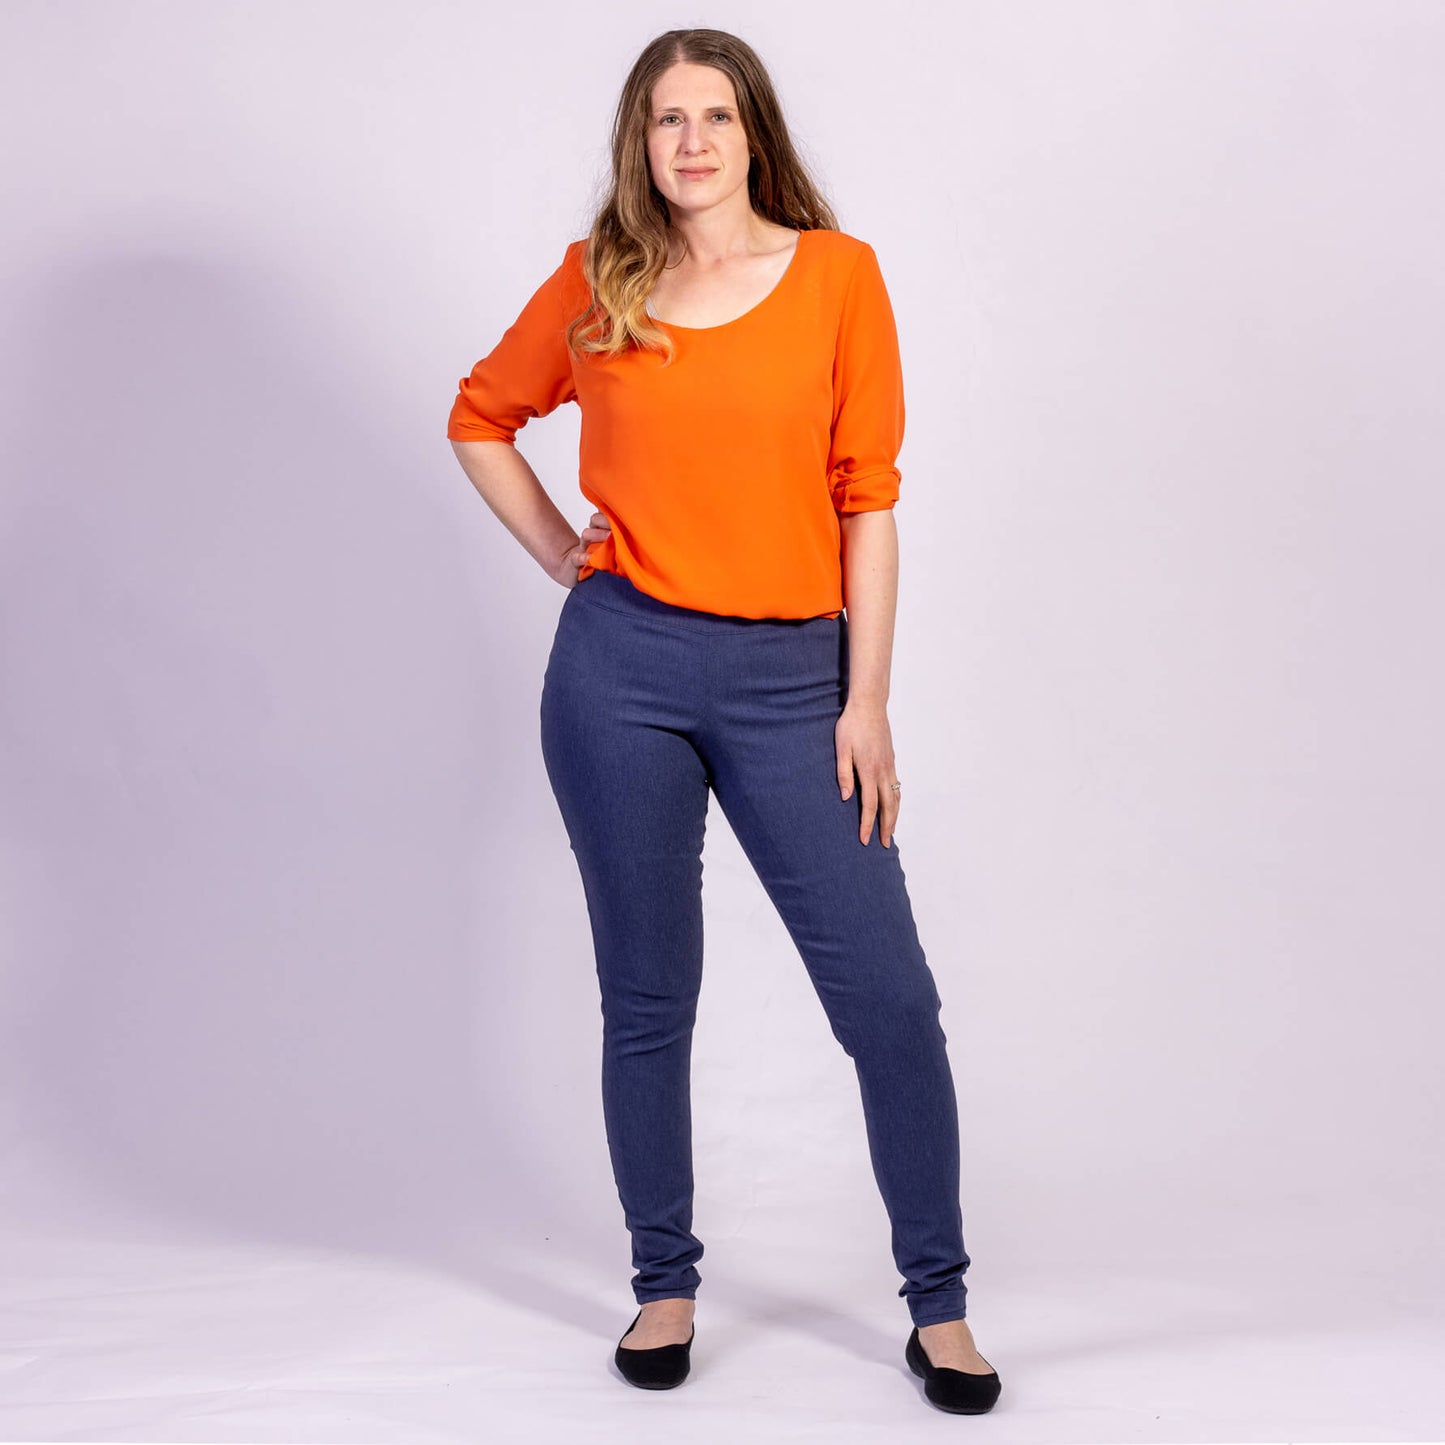 Orange womens designer top from clothing by desiree